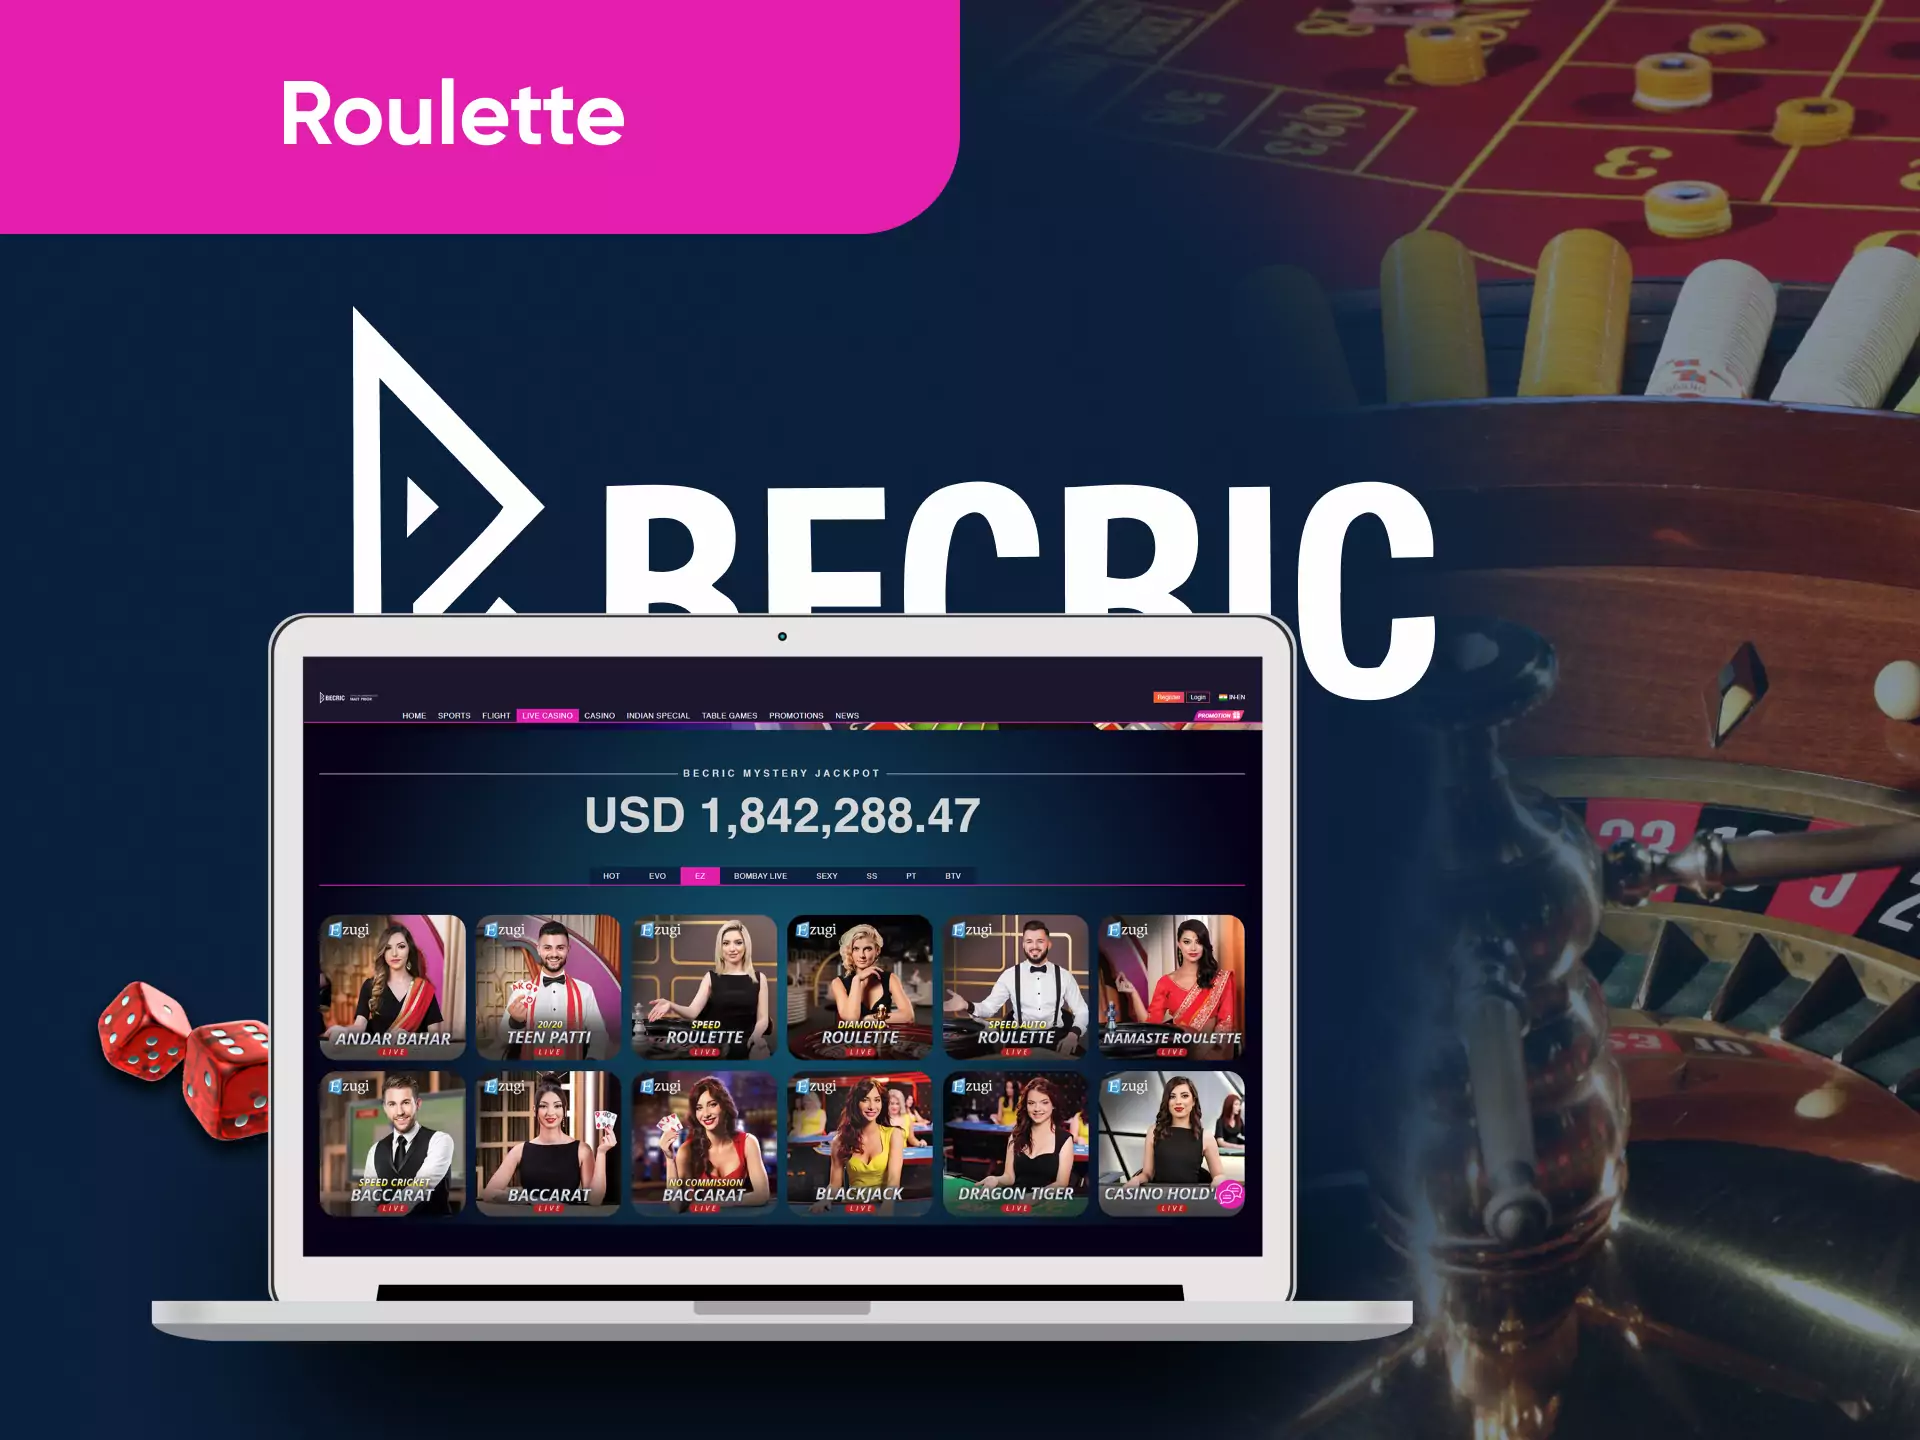 In the Becric Casino, you can play different types of roulette.